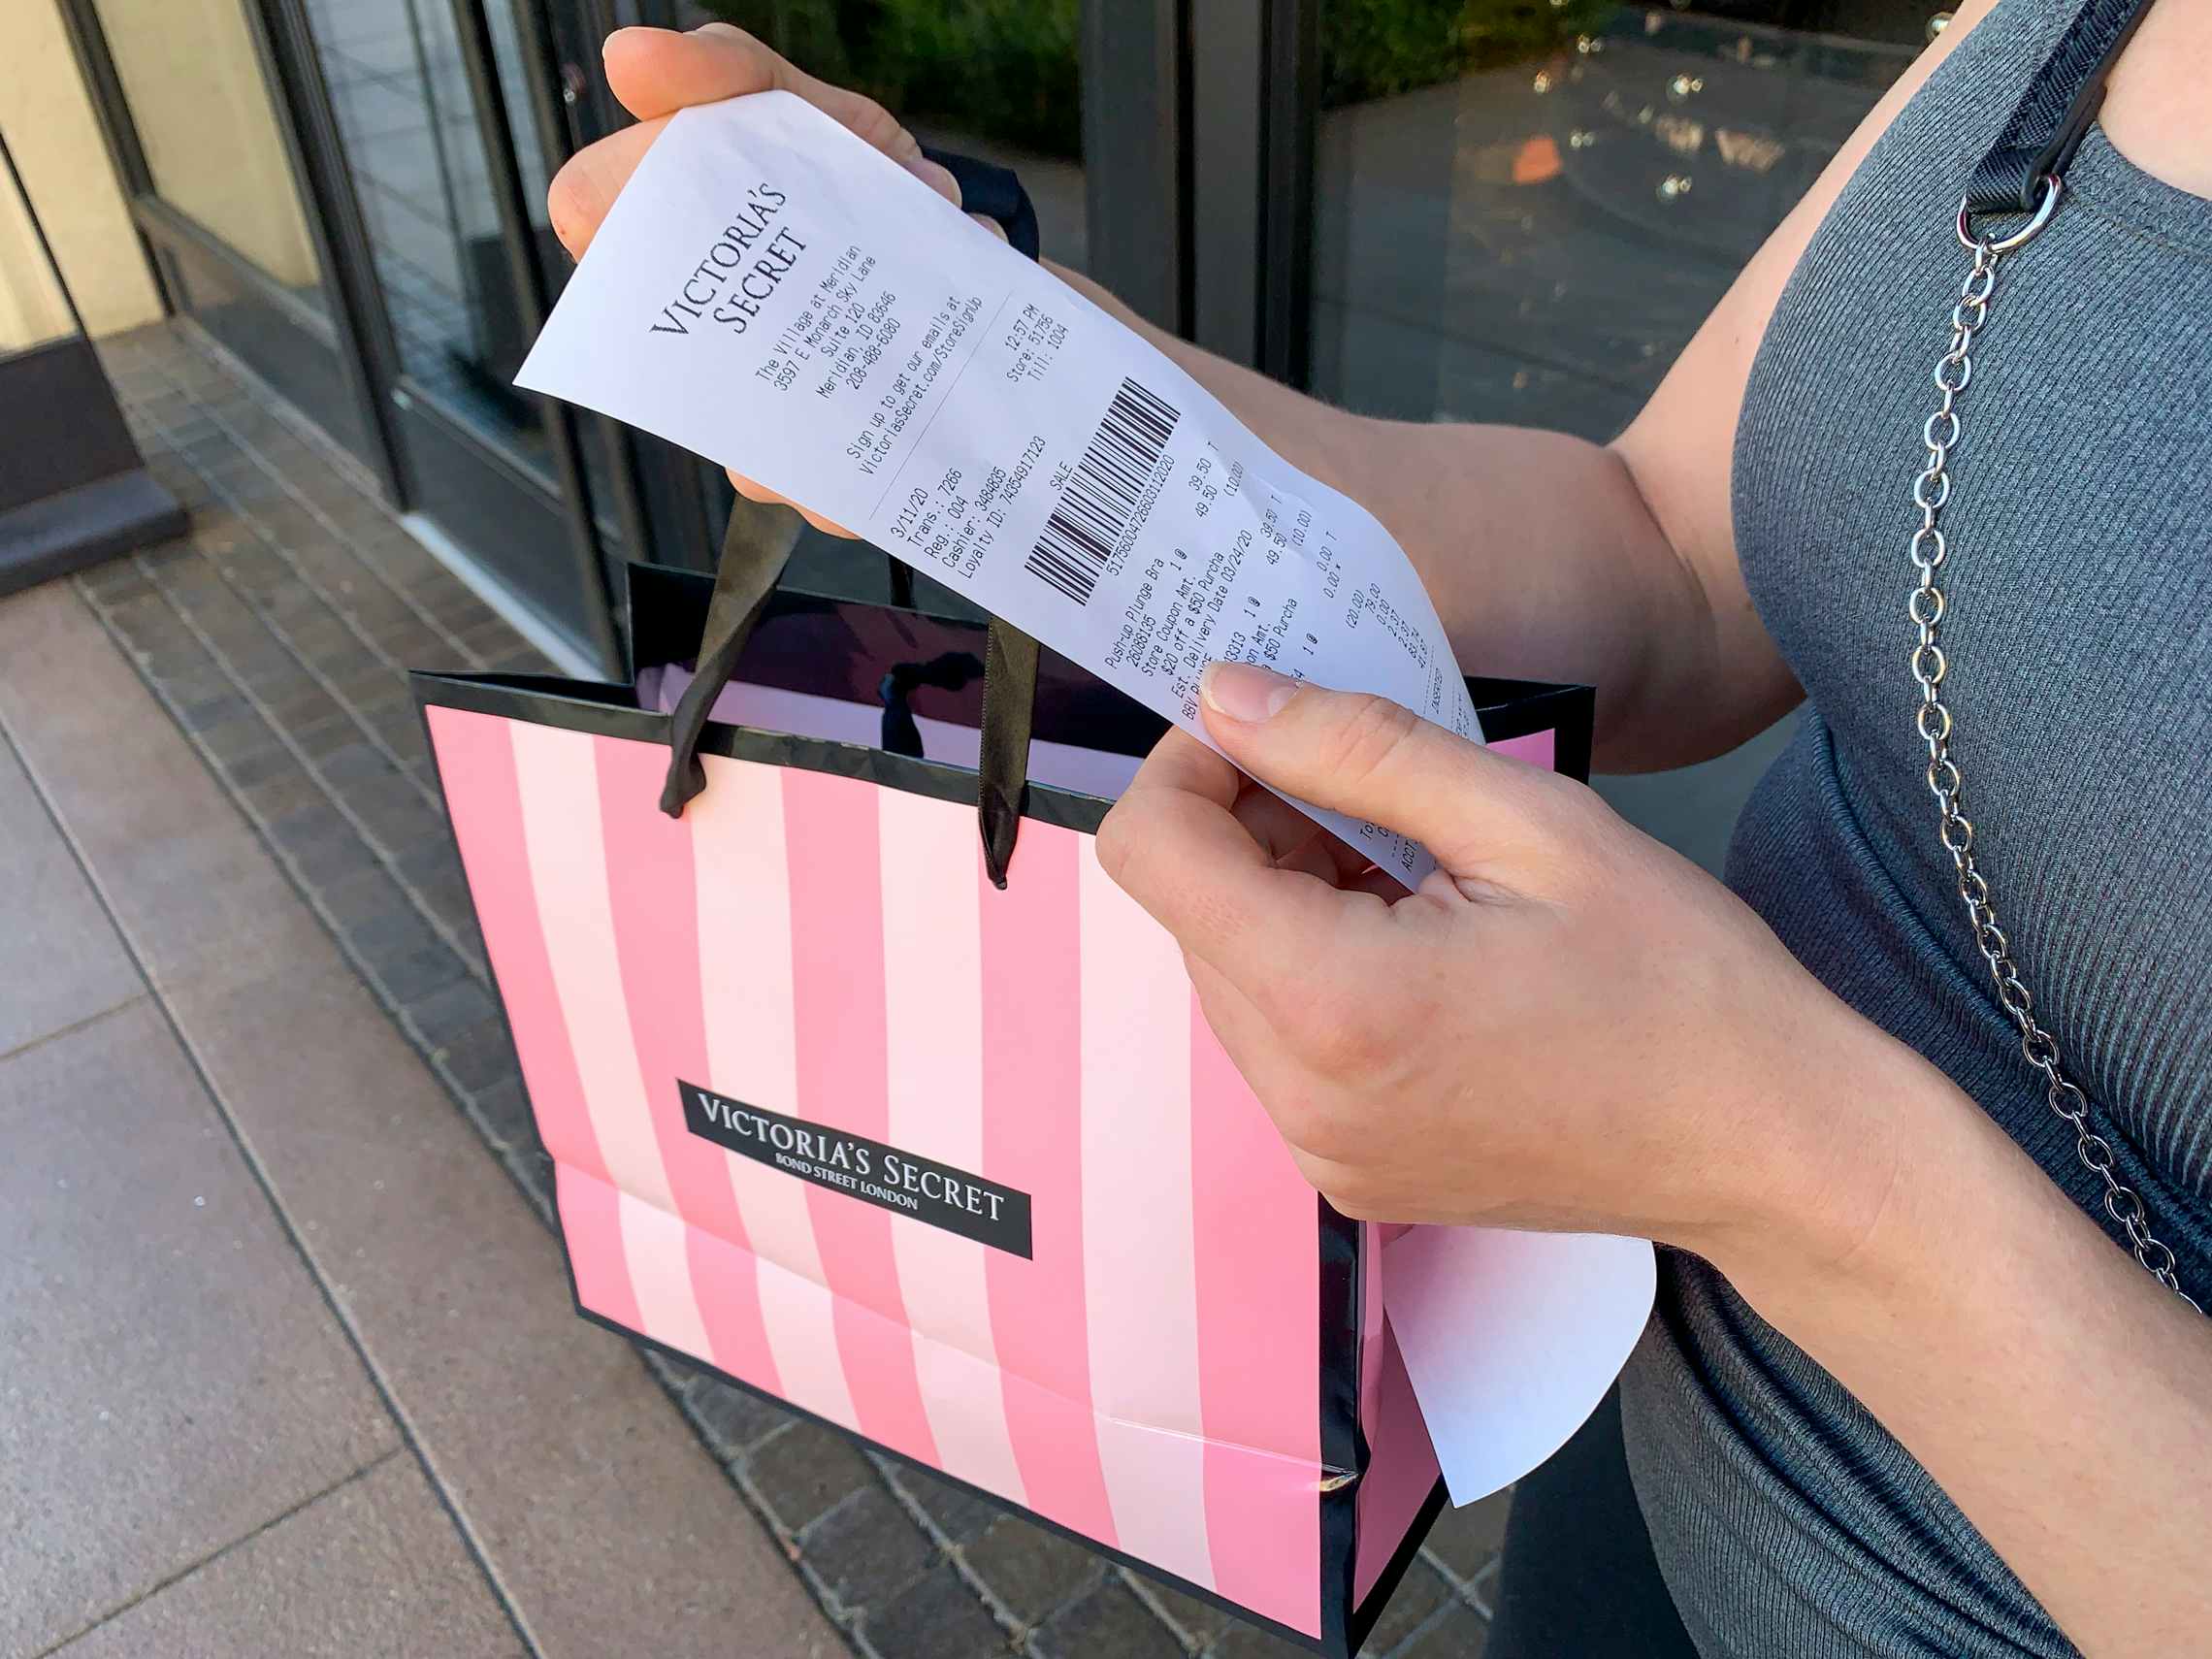 50% Off Promo on a Black Friday Tote Bag by Victoria's Secret